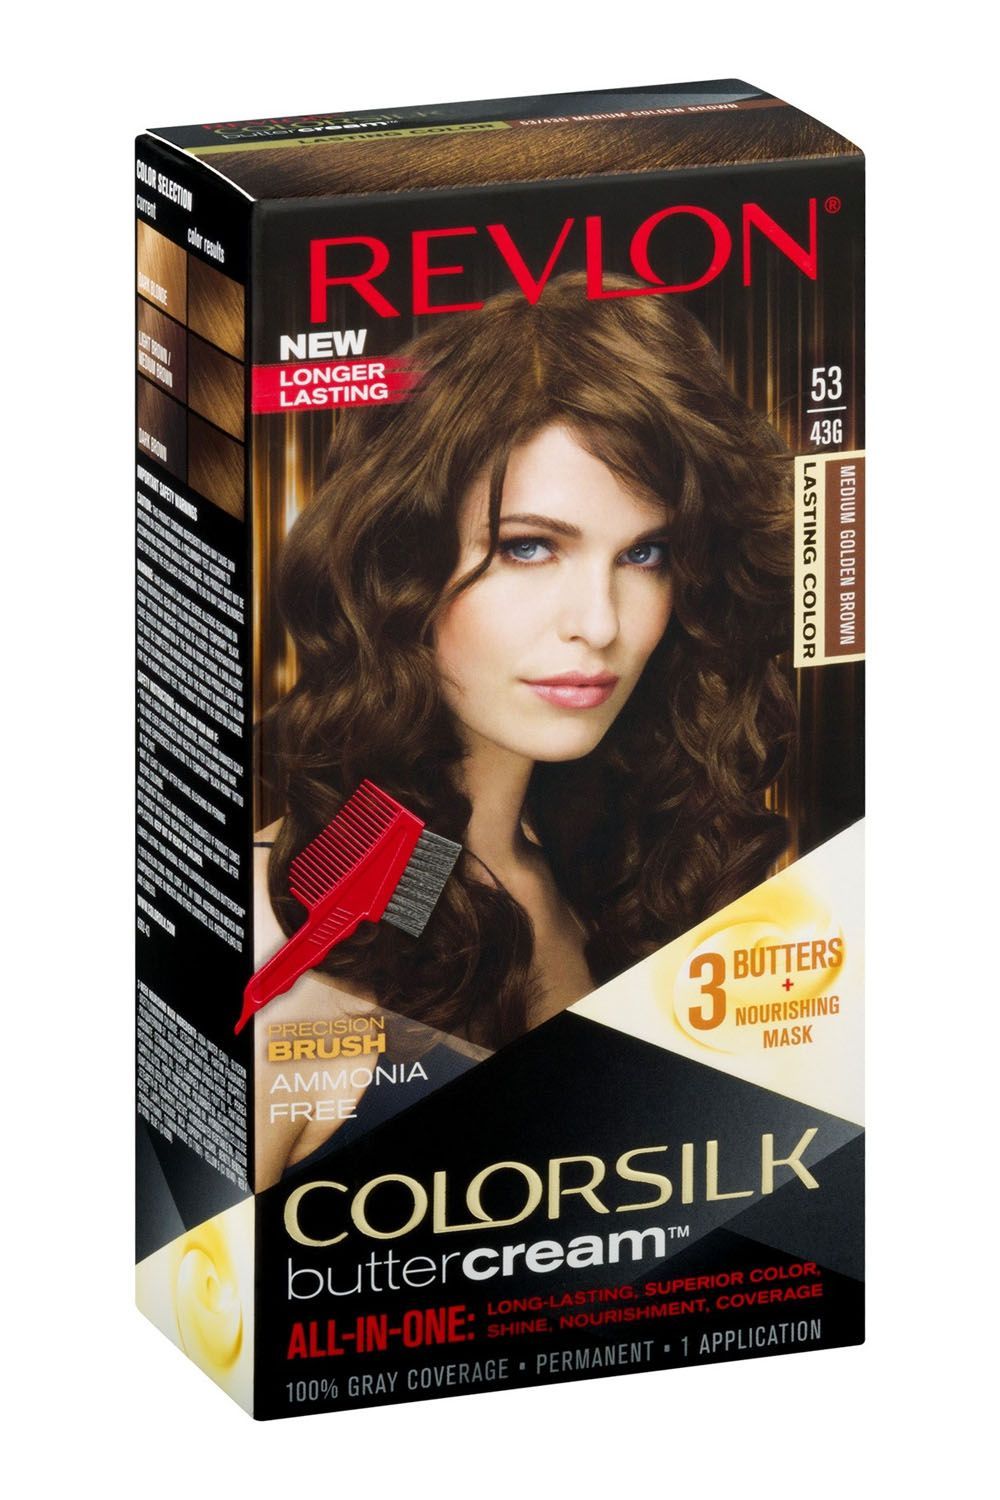 12 Best At Home Hair Colors And Dyes For 2020 Drugstore Hair Dye